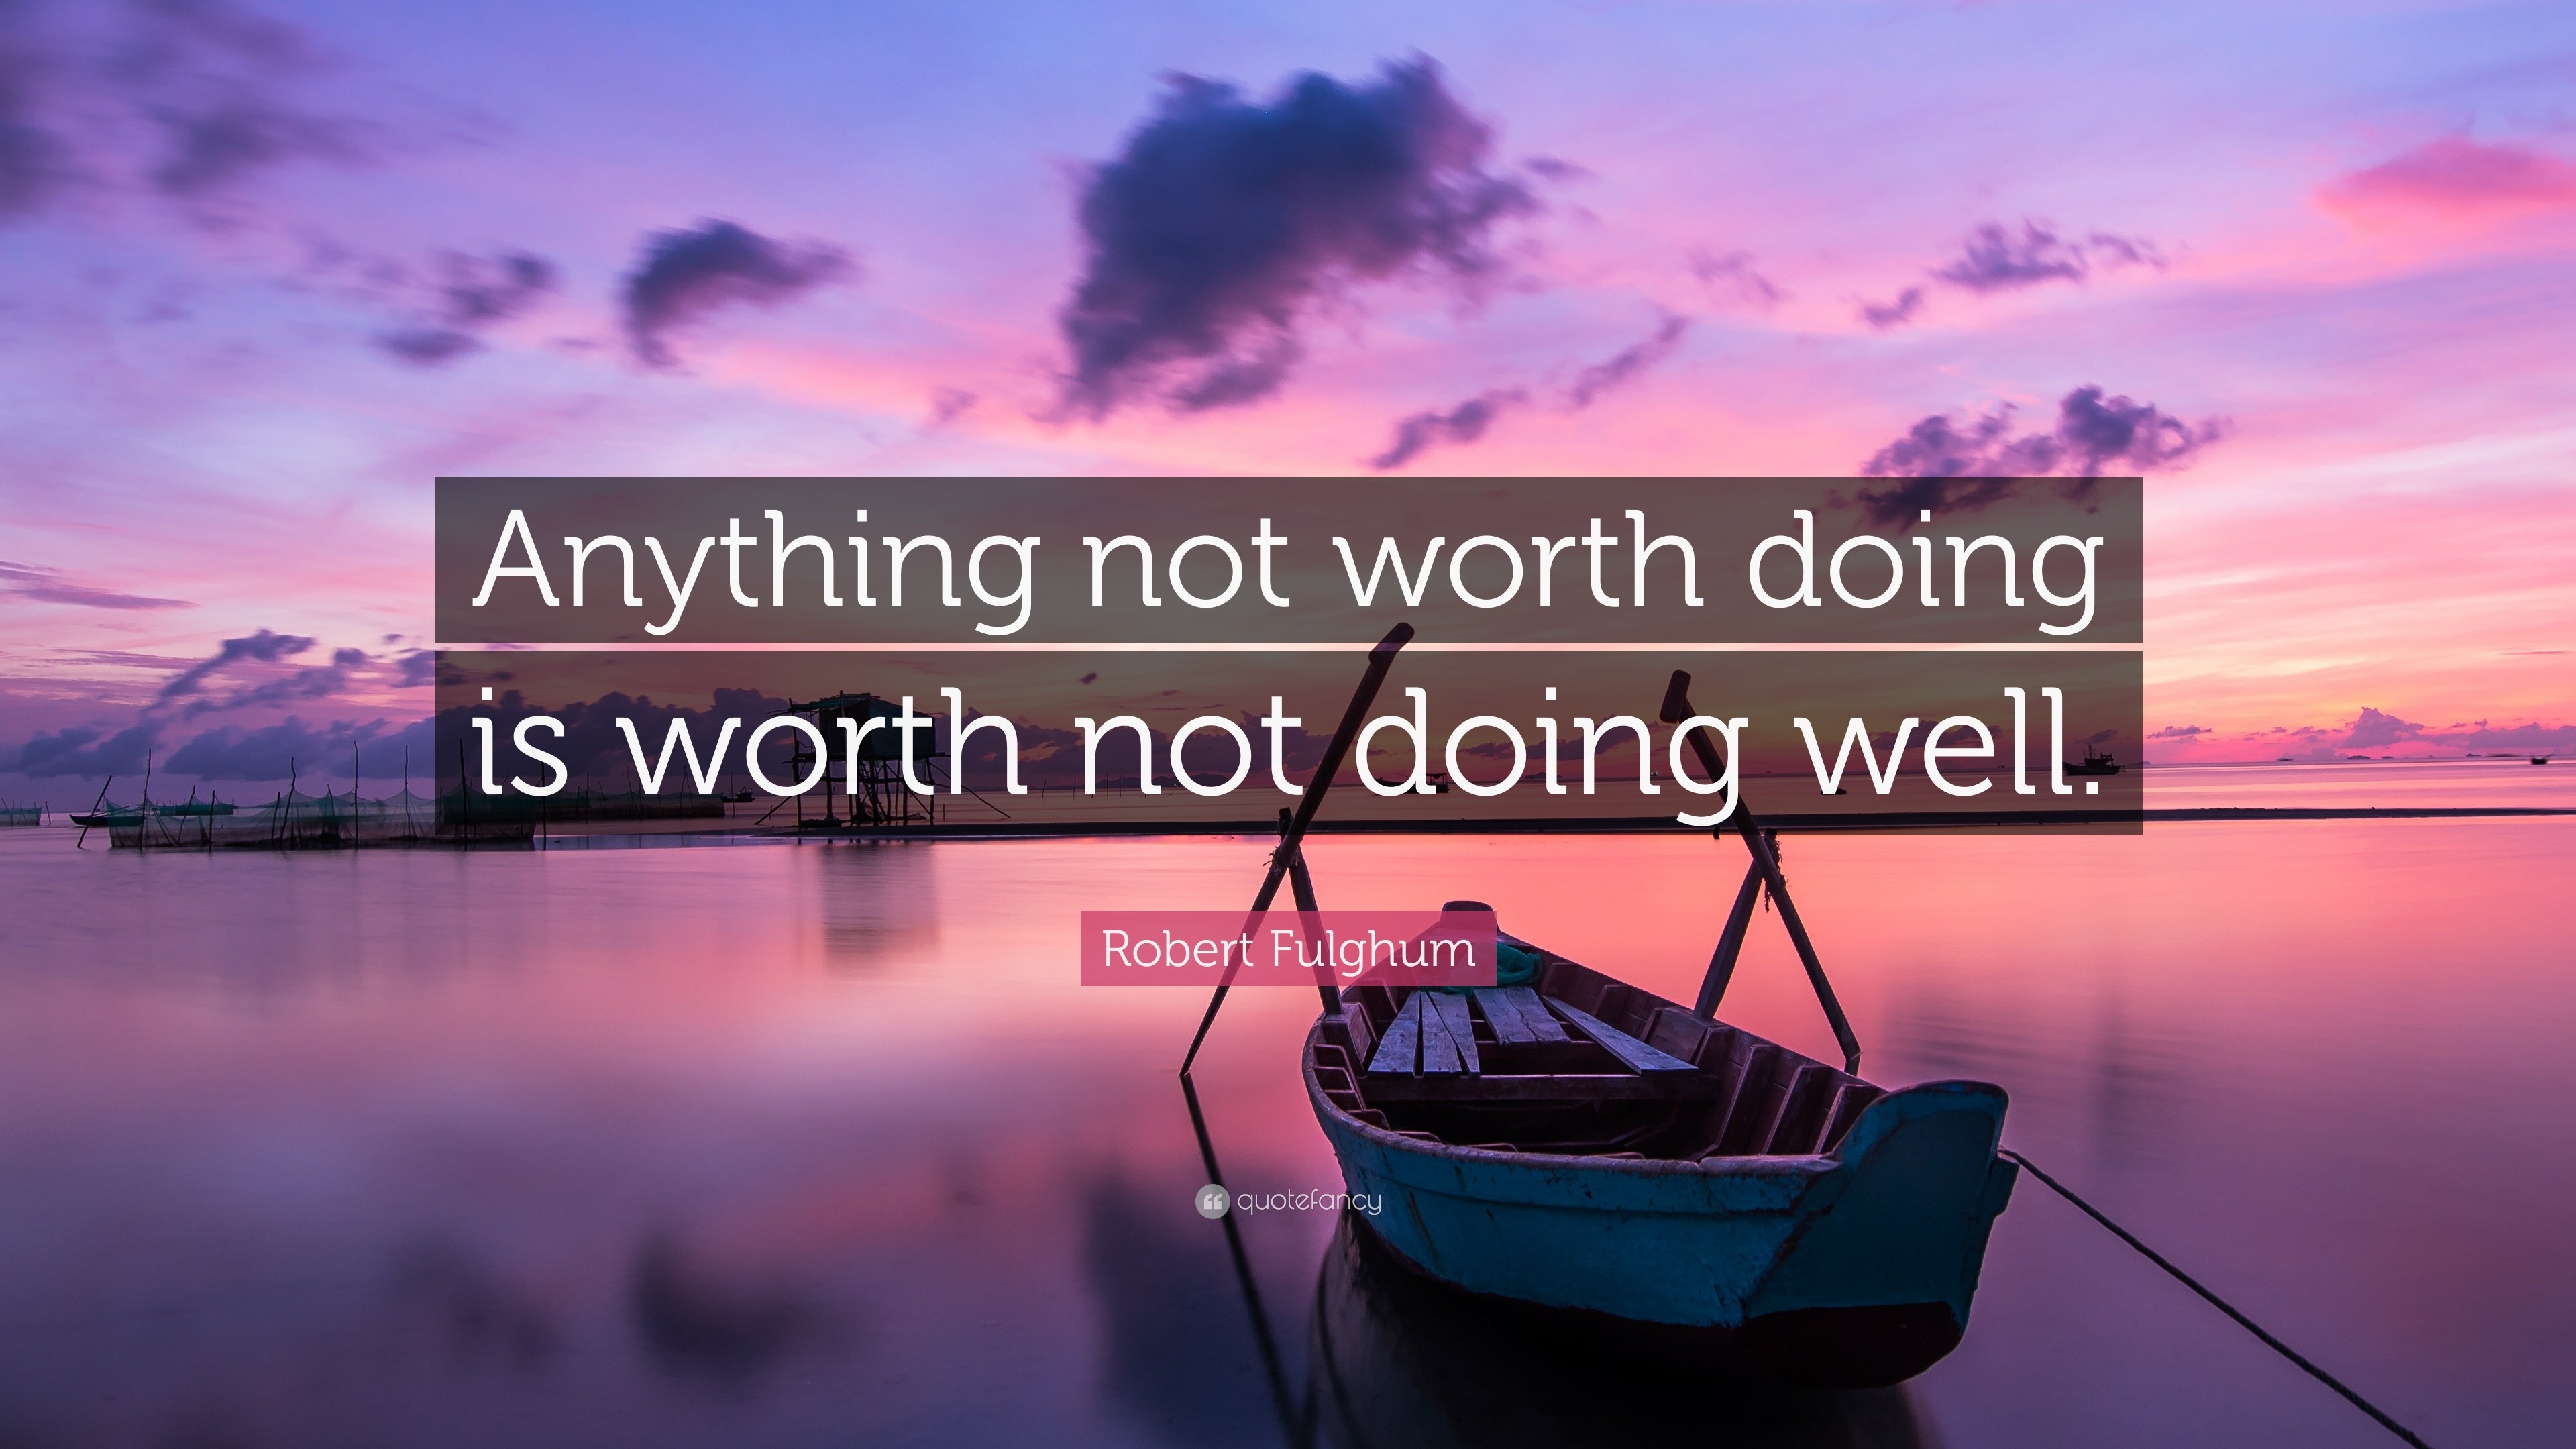 1787586 Robert Fulghum Quote Anything Not Worth Doing Is Worth Not Doing 